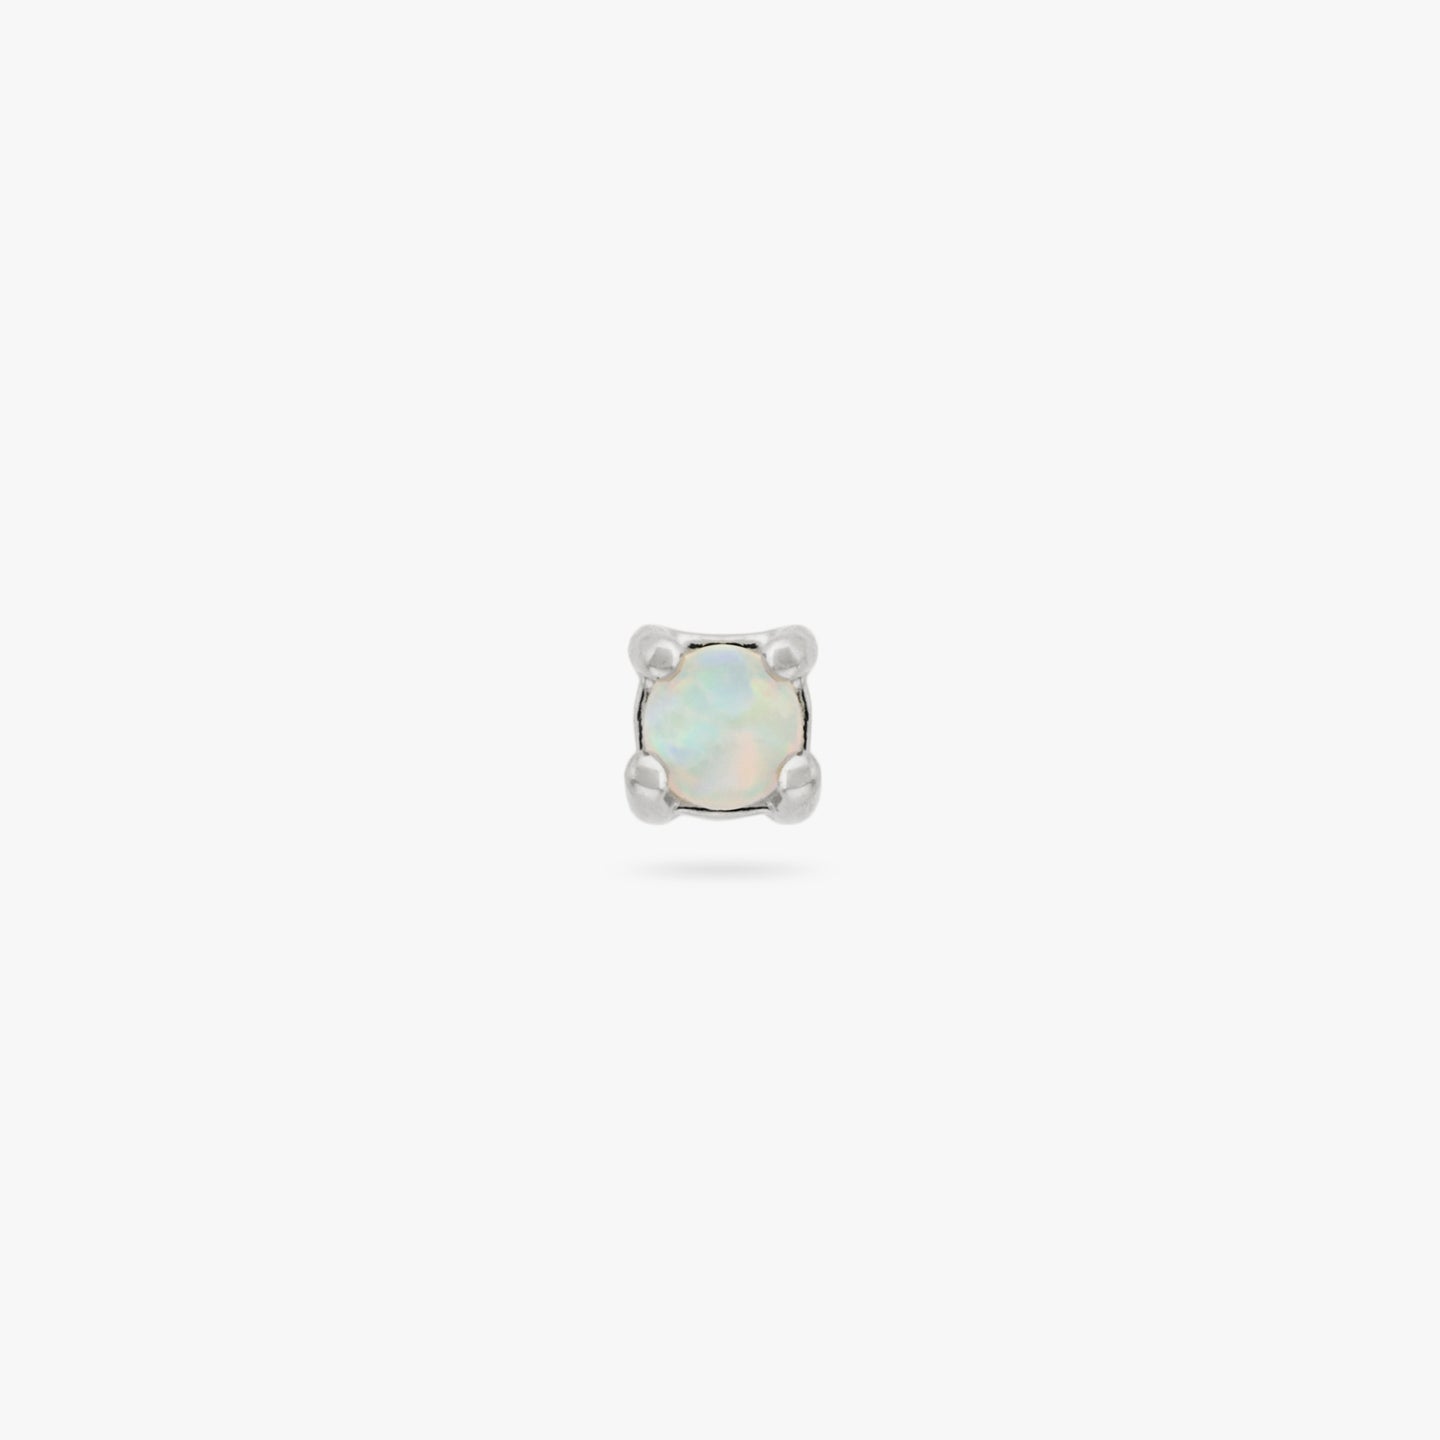 This is a small silver stud with an opal color:null|silver/opal